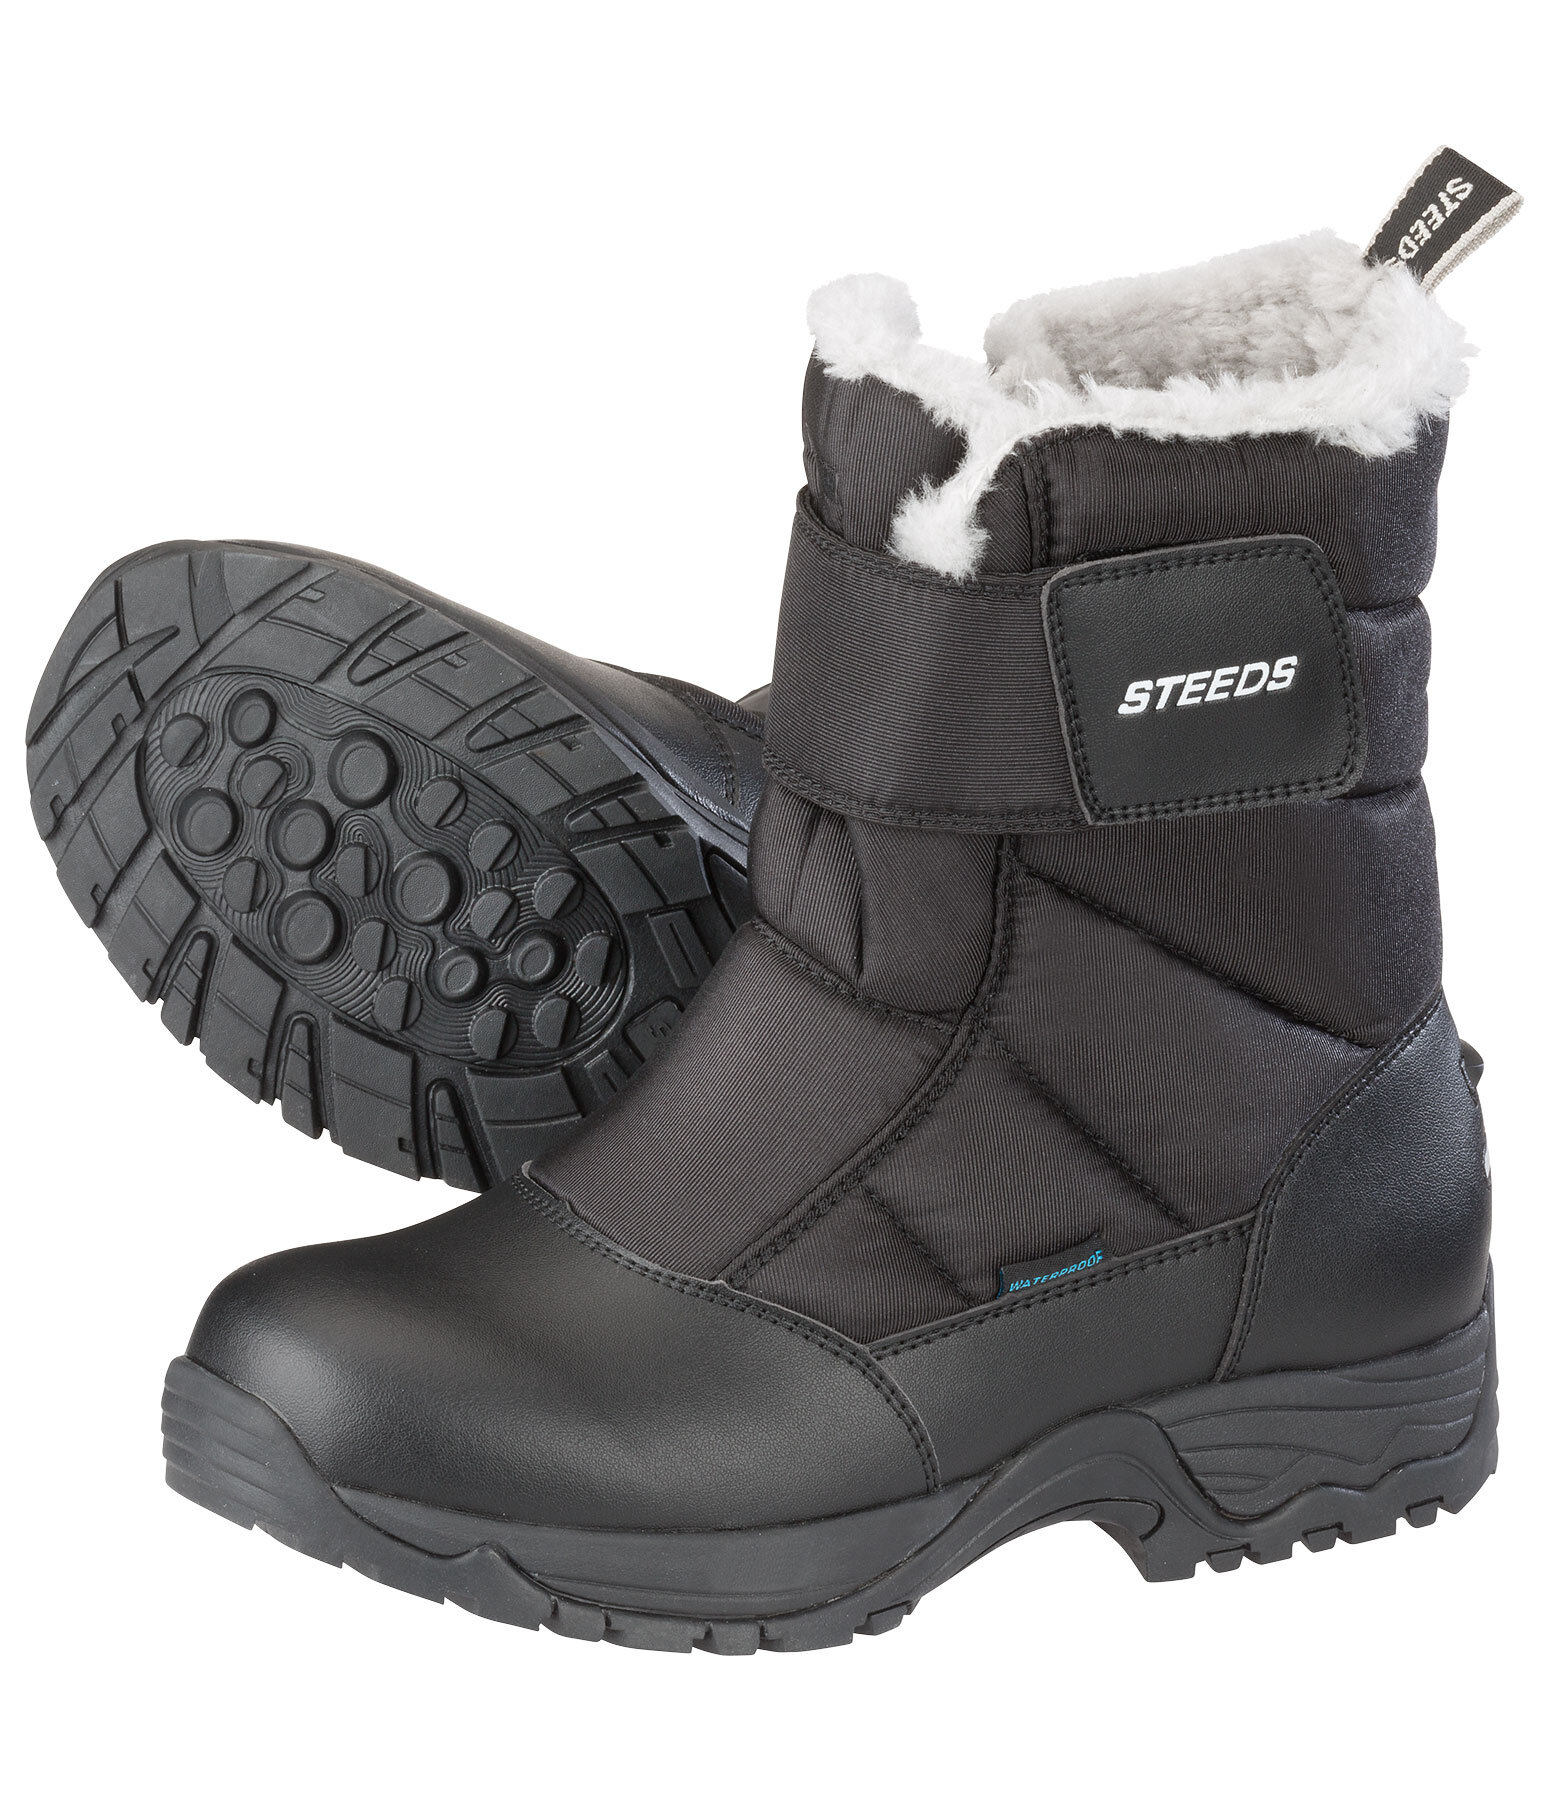 Thermal Boots Winter Rider Midcut II